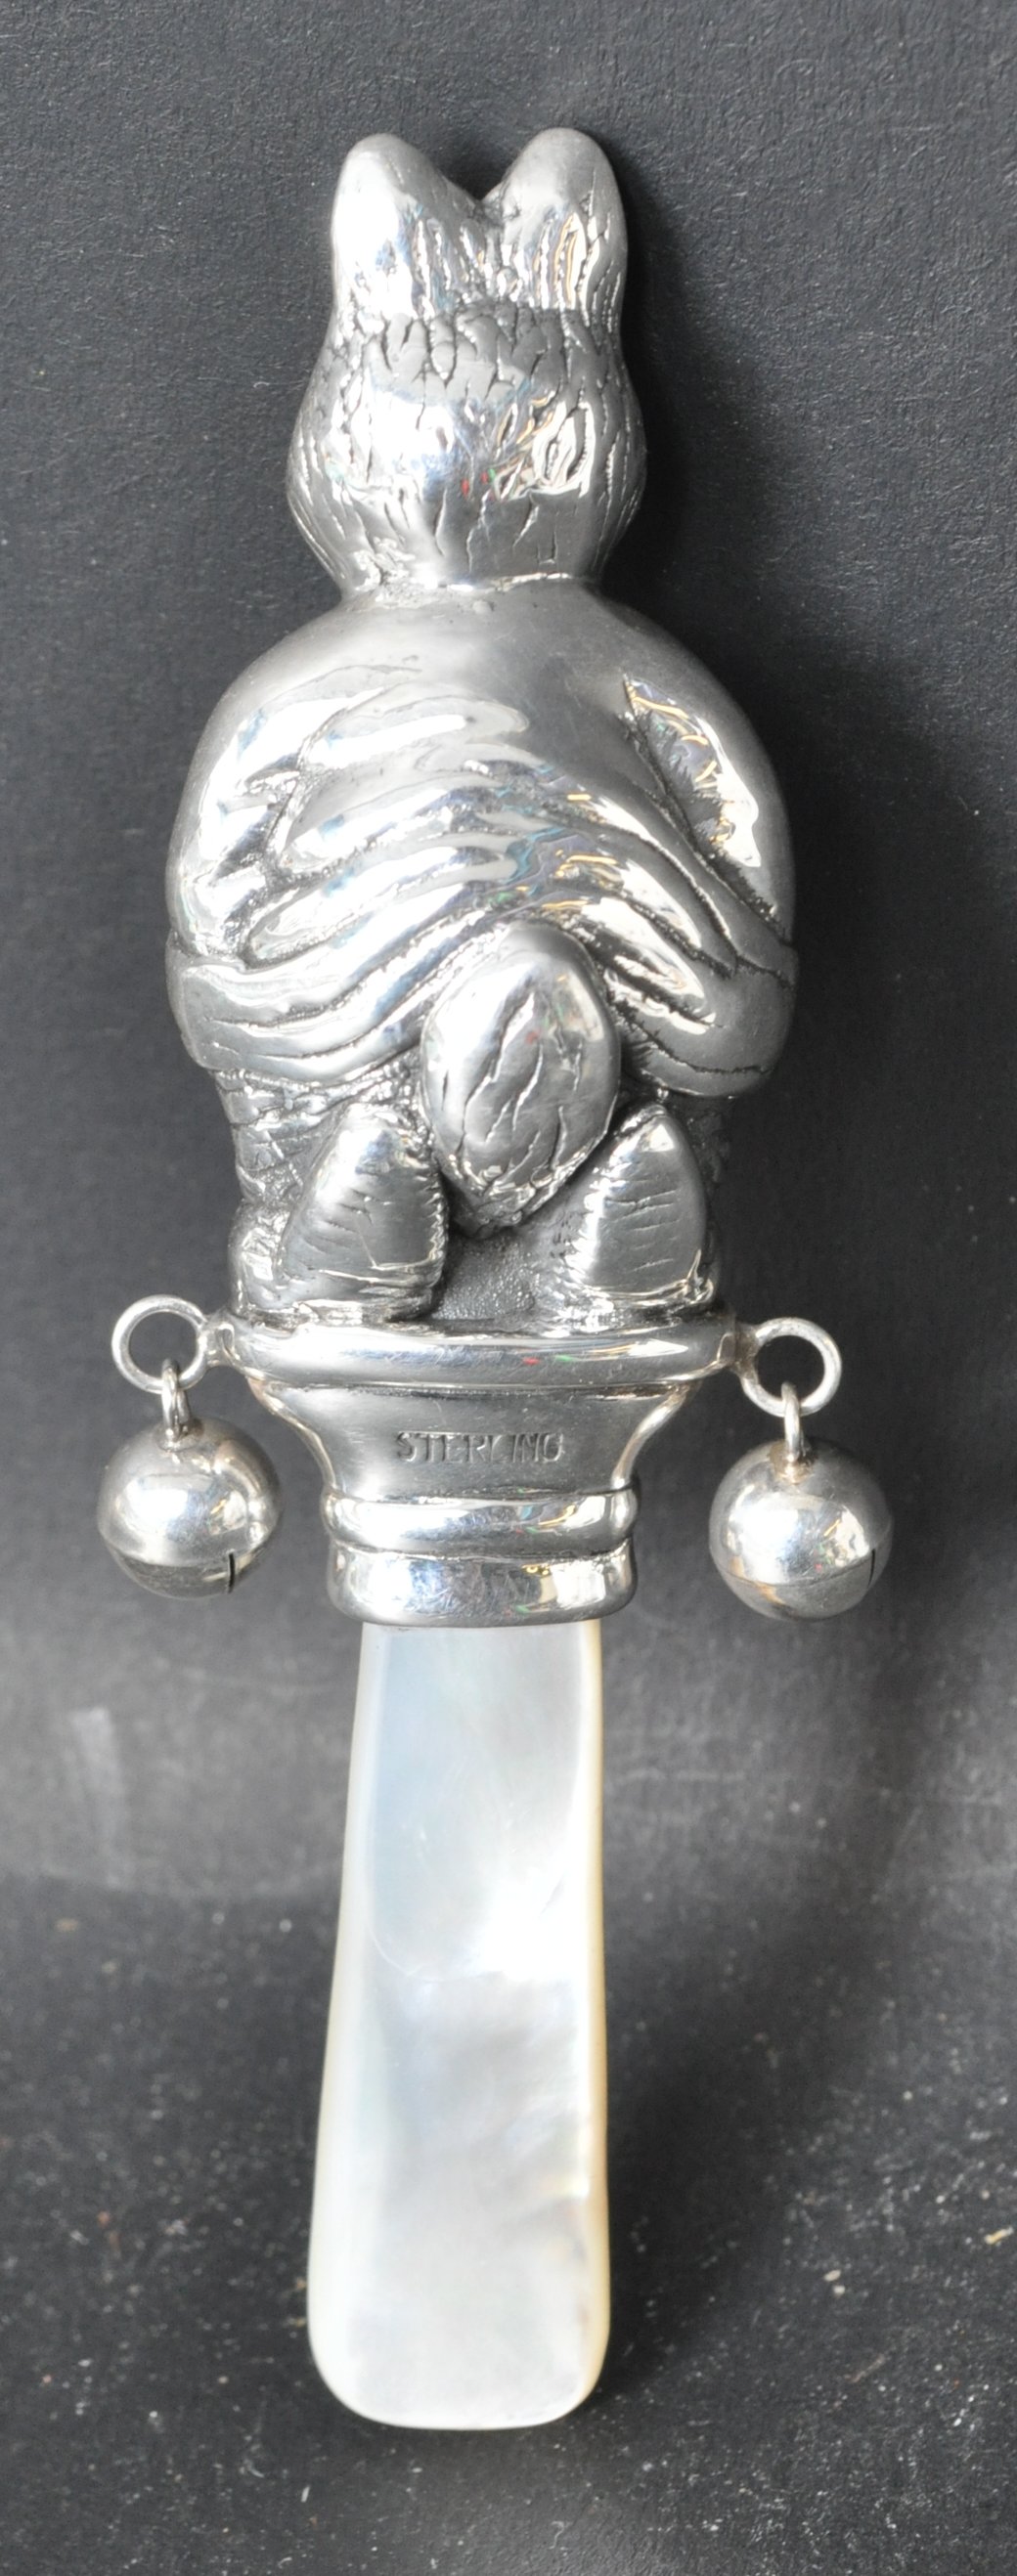 SILVER CHILDS PETER RABBIT RATTLE - Image 2 of 4